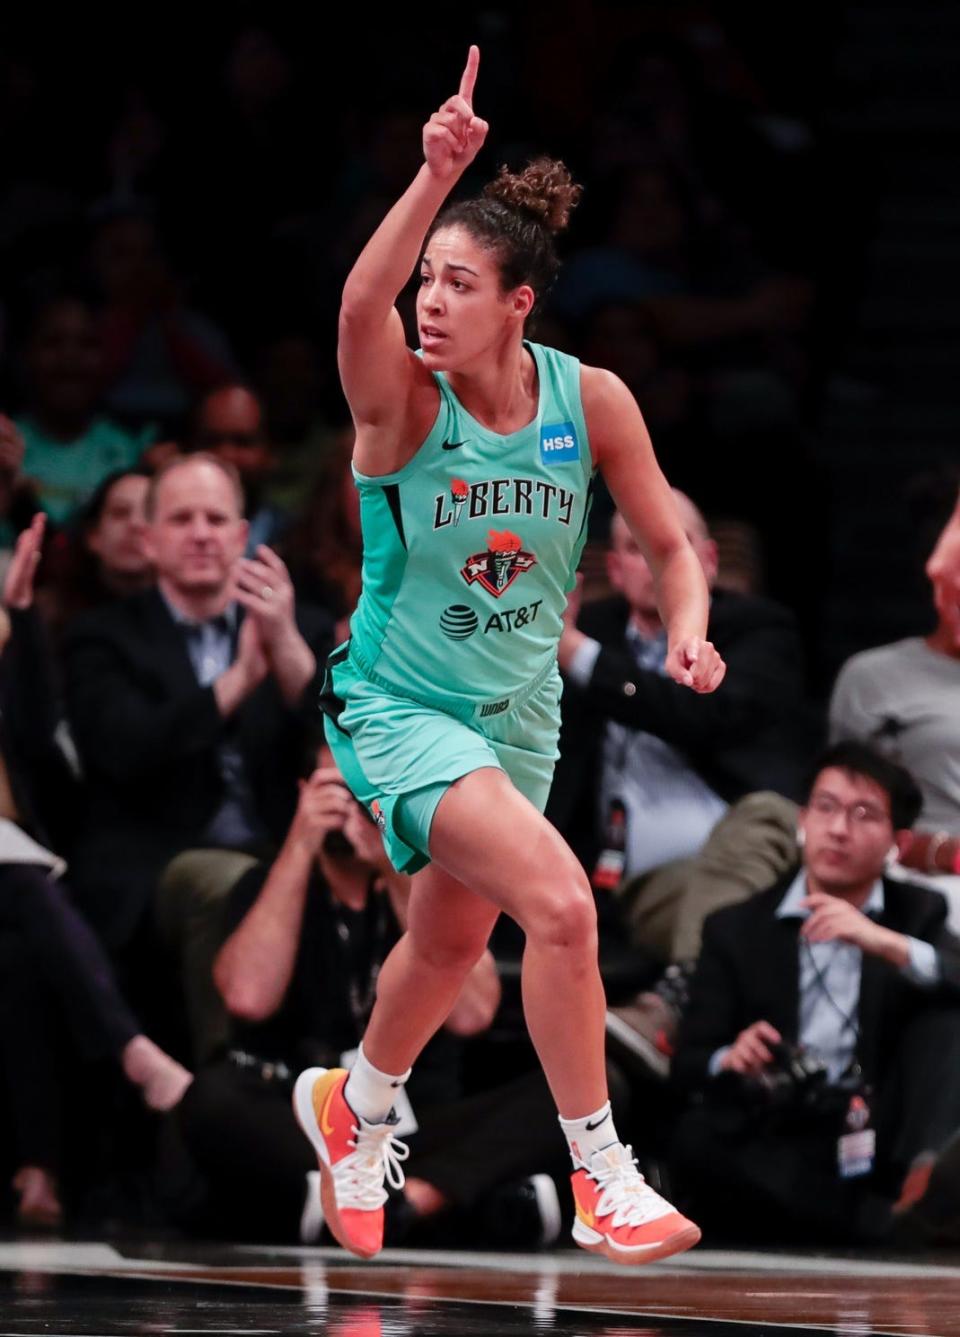 New York Liberty guard Kia Nurse celebrates after hitting a 3-pointer in a 2019 exhibition game.